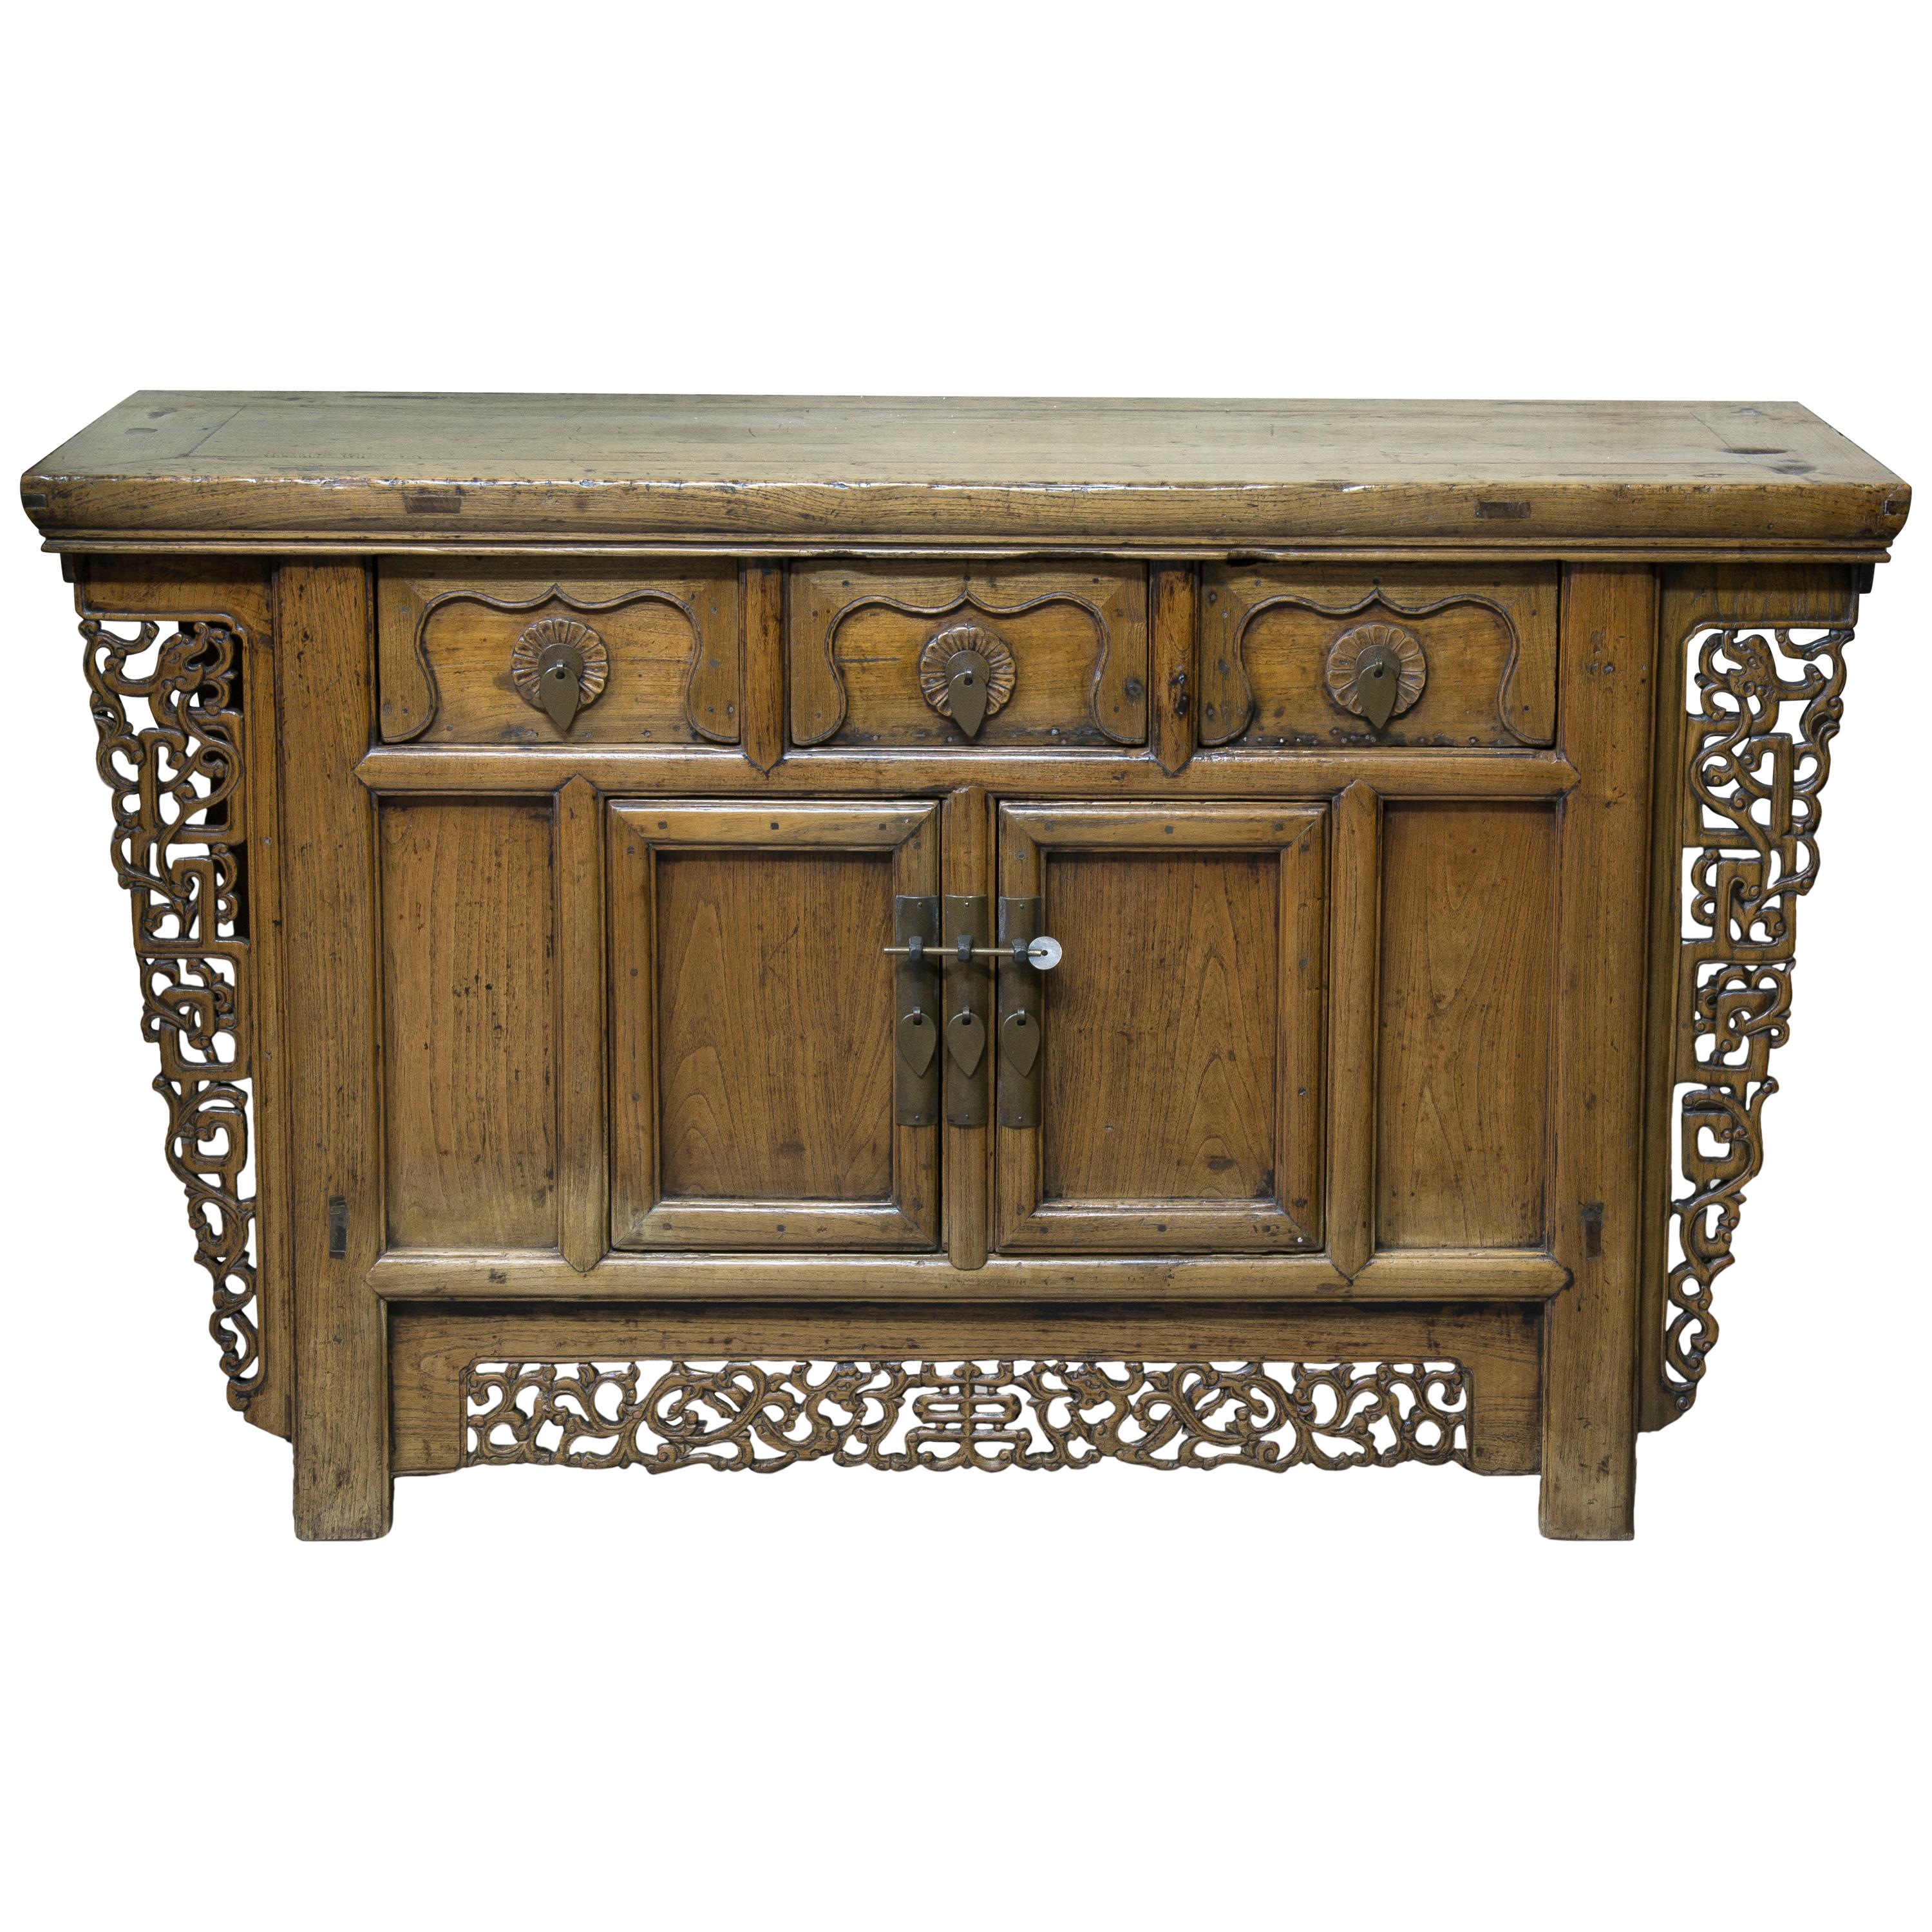 Oriental Commode, Wood, Metal, circa Early 20th Century